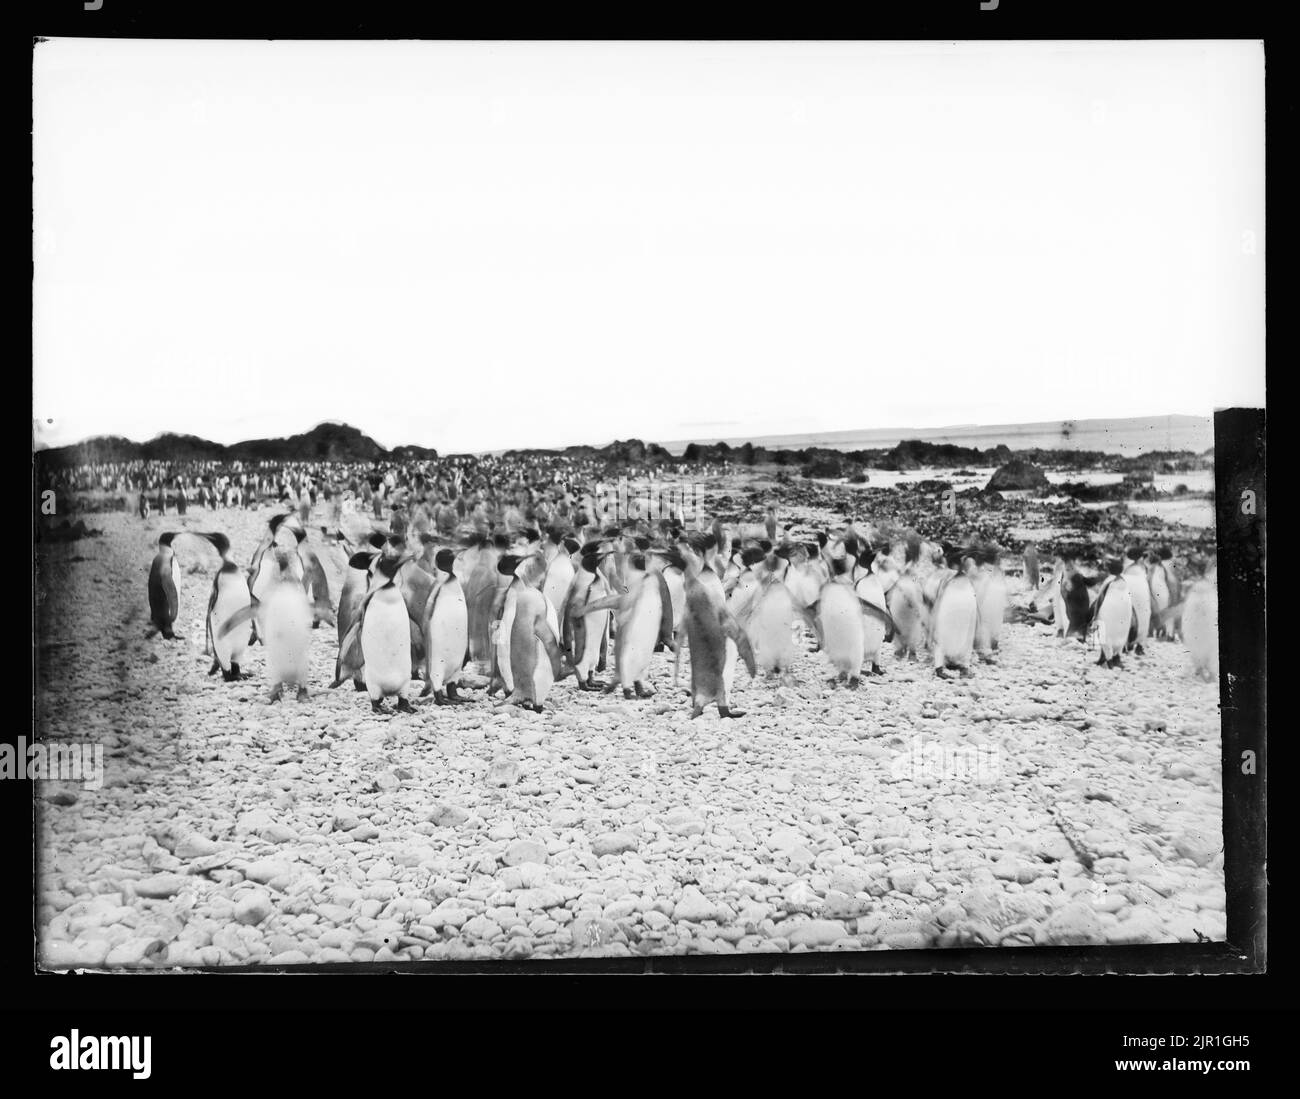 King Penguins - Mothers and young, circa 1900, New Zealand, maker unknown. Stock Photo